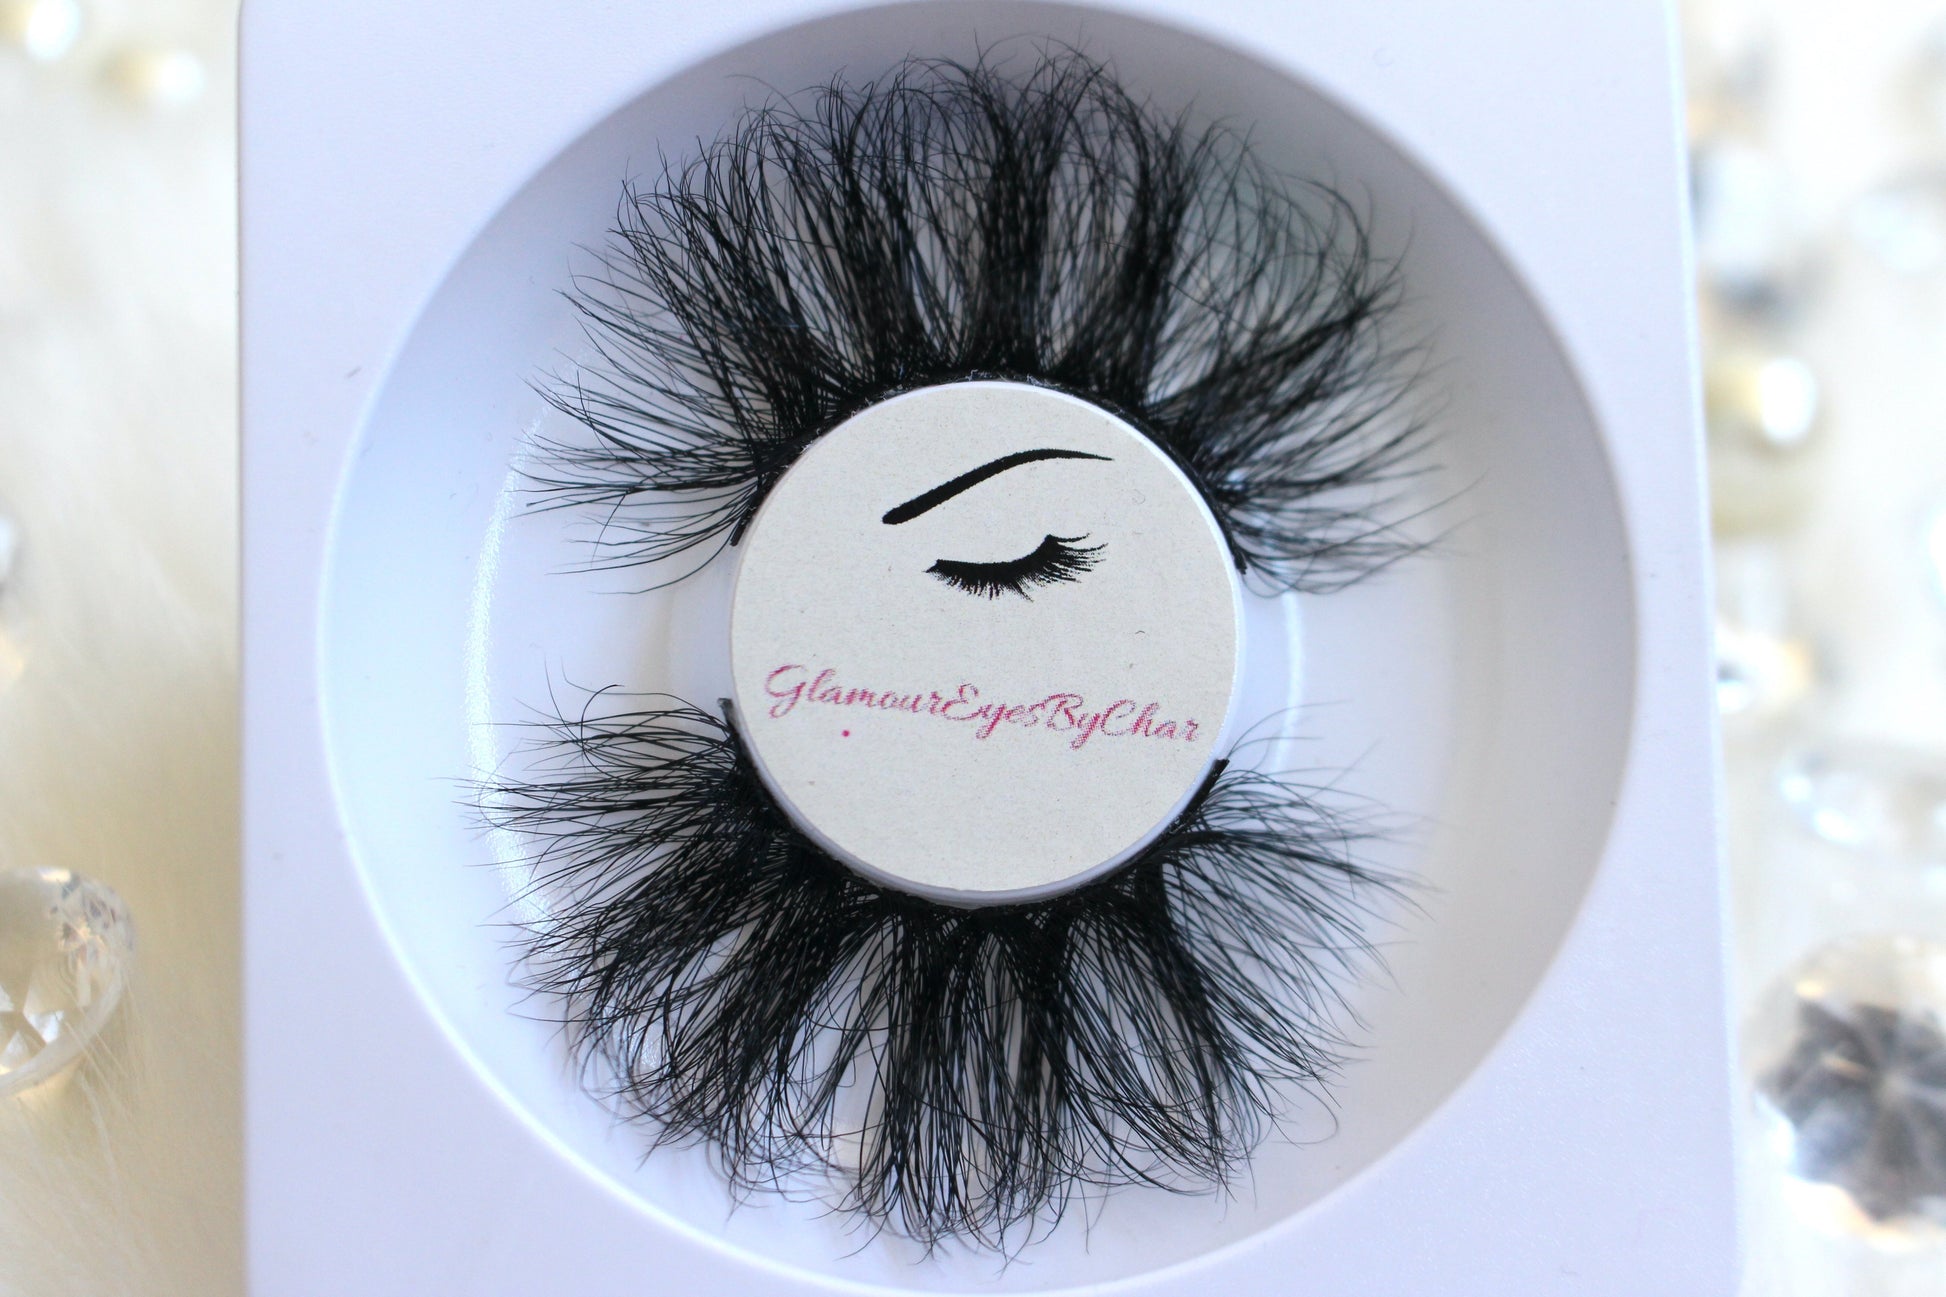 These 5D luxurious mink lashes are called Royalty and are 25mm in length. They are very dramatic, wispy, have a criss cross style, lightweight, and comfortable to wear on the lids. The thin lashband, makes the application process a breeze.  Royalty are suitable for dramatic eye looks and can be worn up to 25 times if handled with care. They will definitely make you feel like the goddess that you are but are not for timid lash wearers. 